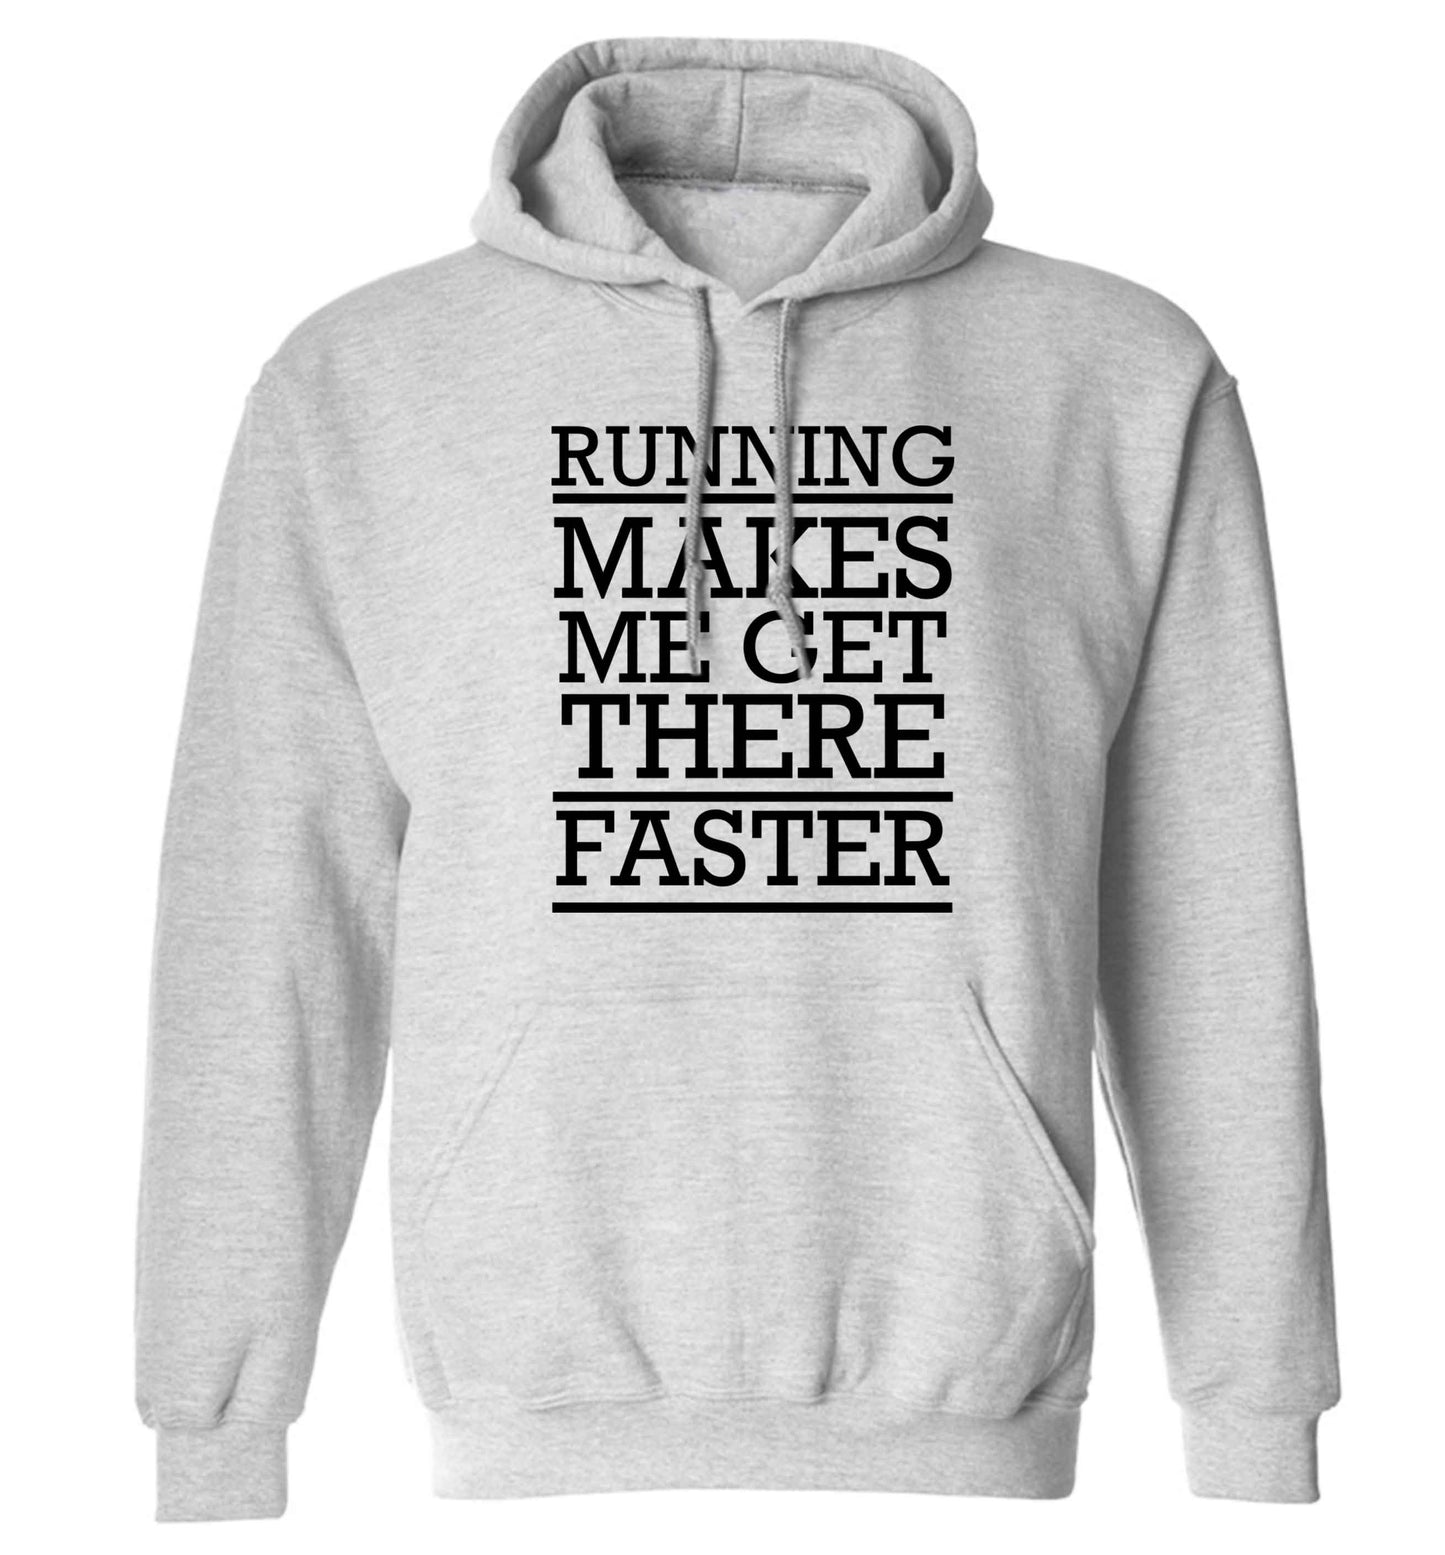 Running makes me get there faster adults unisex grey hoodie 2XL